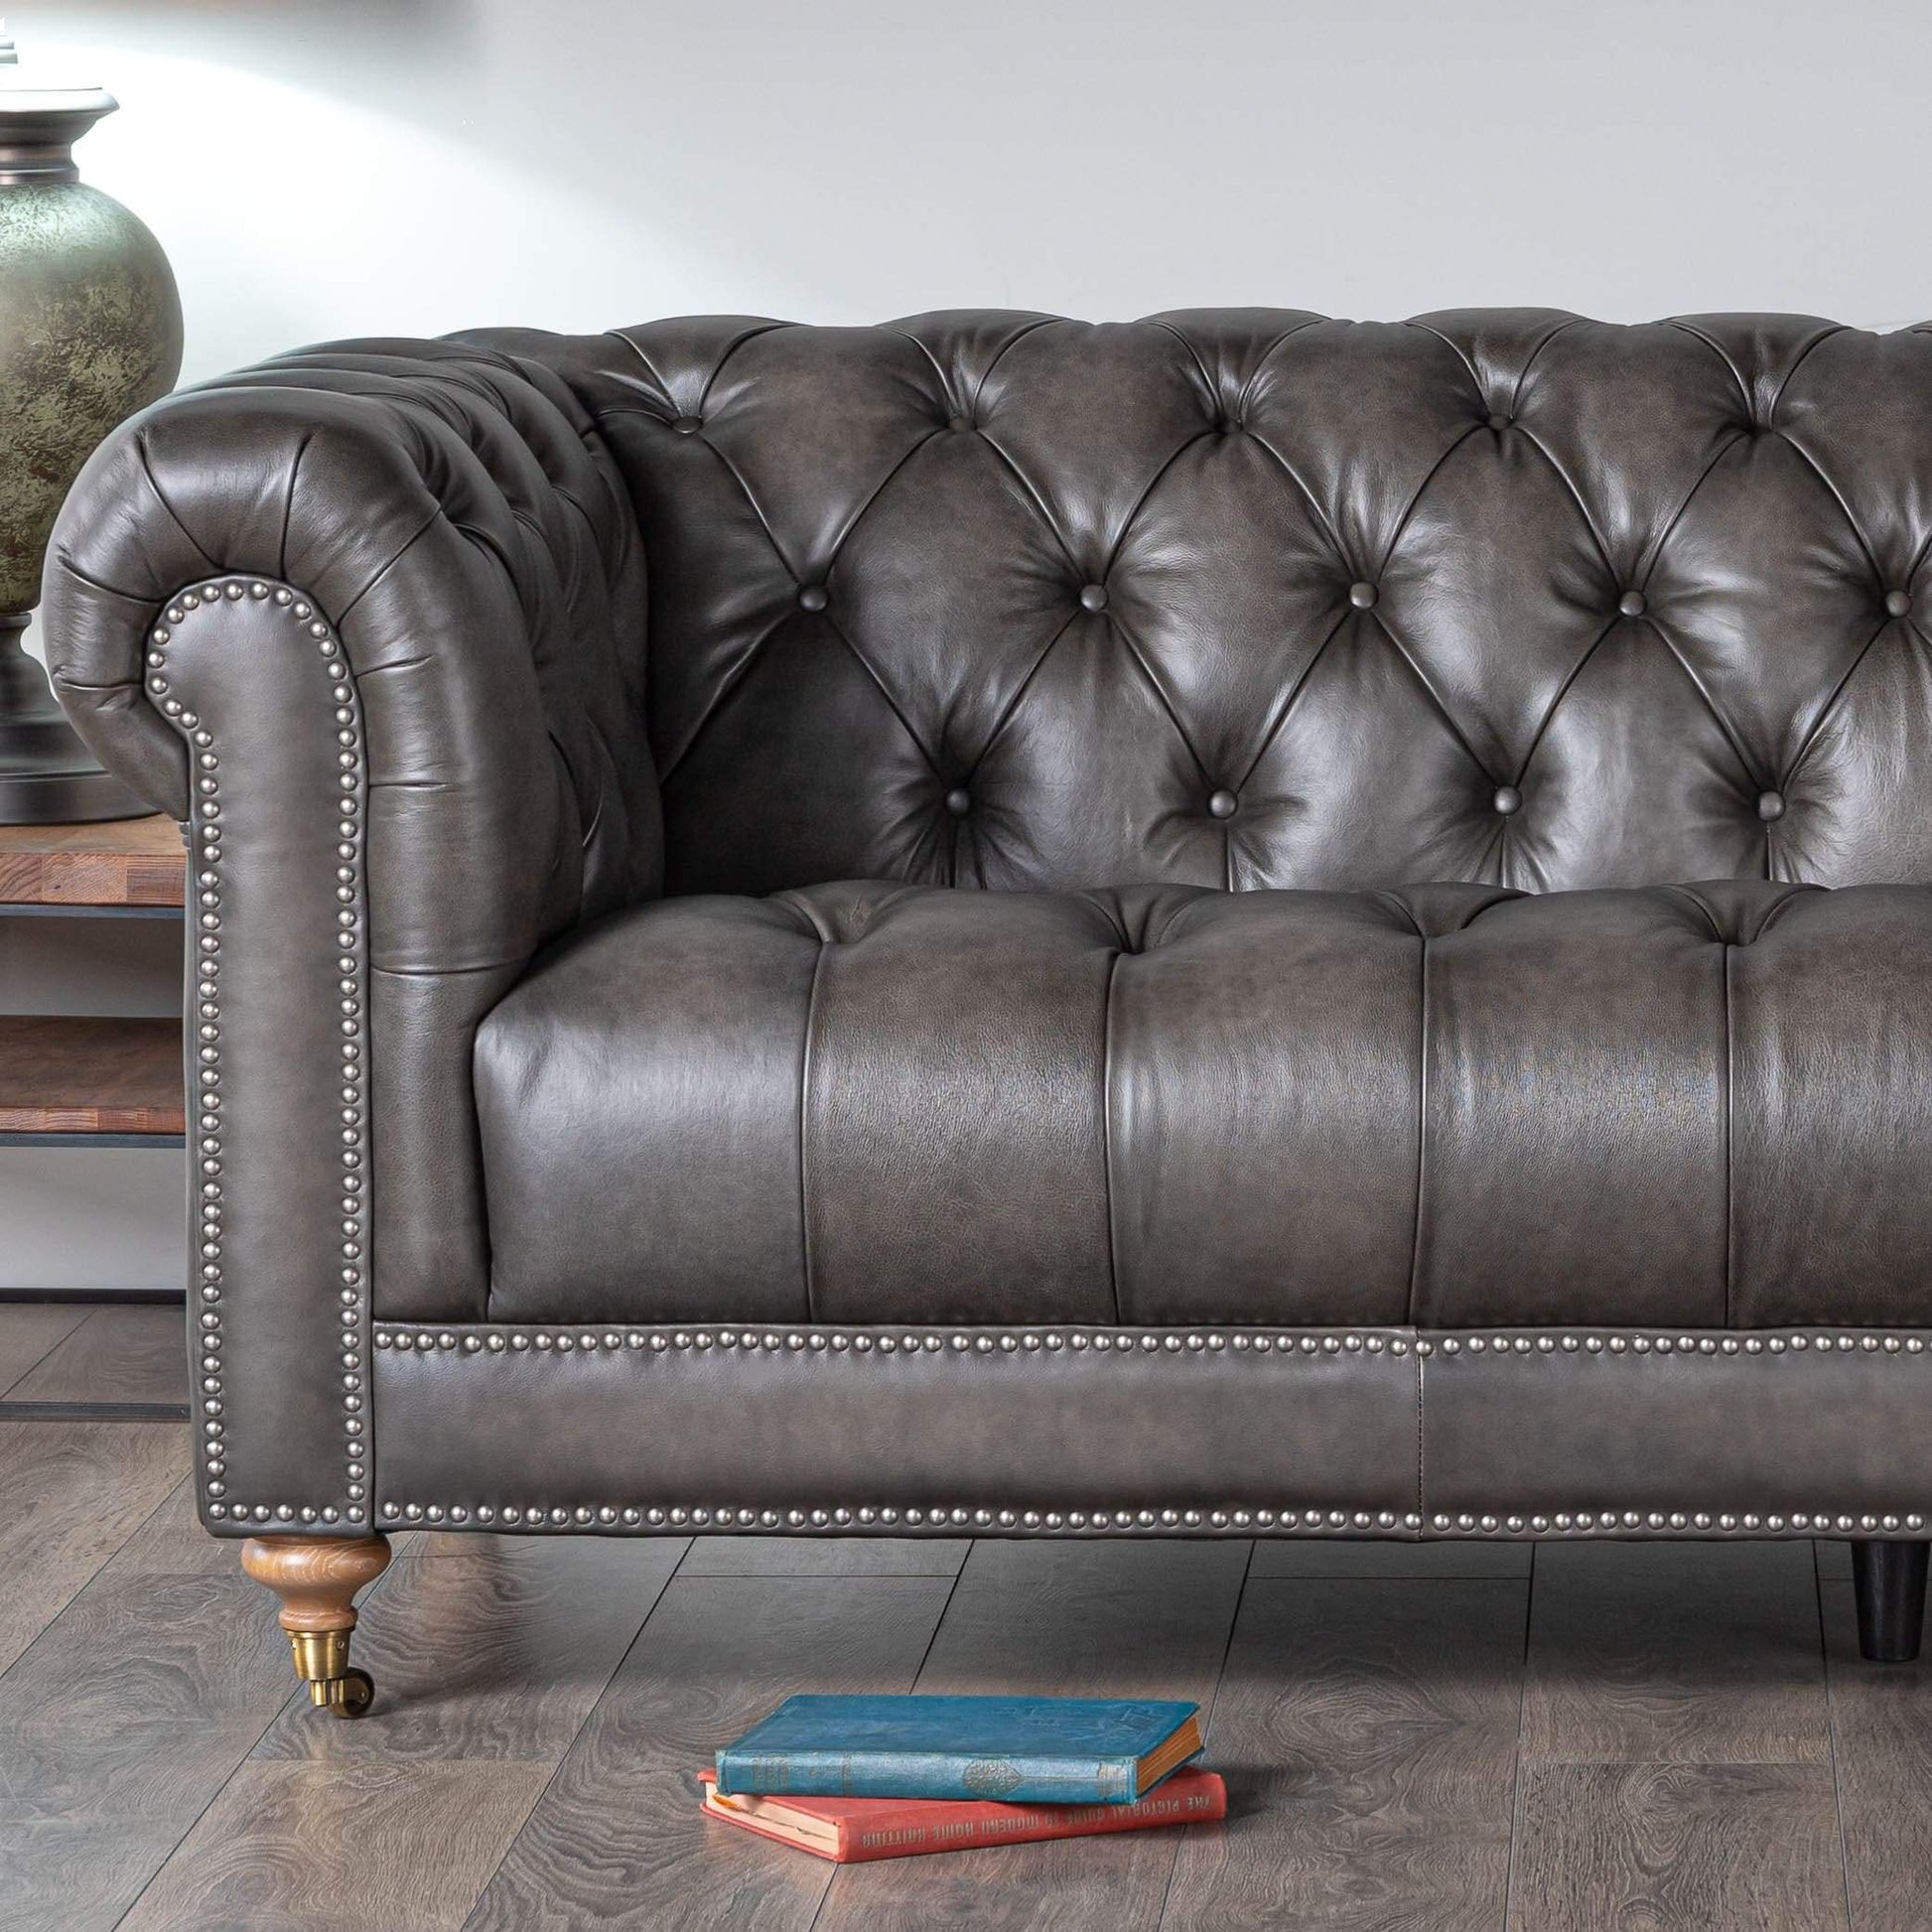 Furniture  -  Piccadilly Grand Leather Sofa  -  50153471